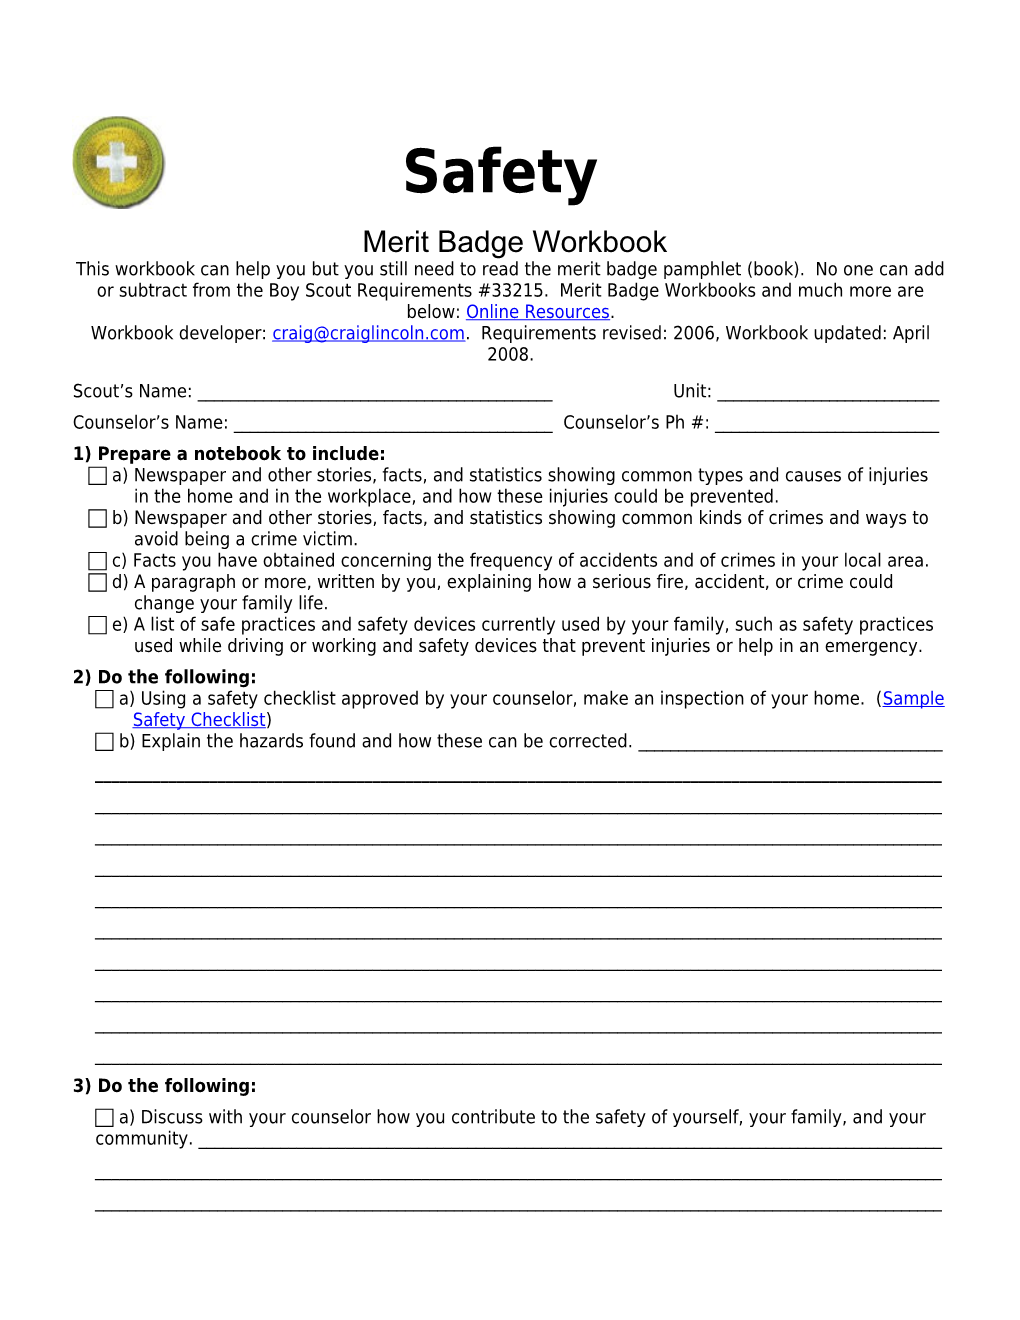 Safety P. 1 Merit Badge Workbook Scout's Name: ______